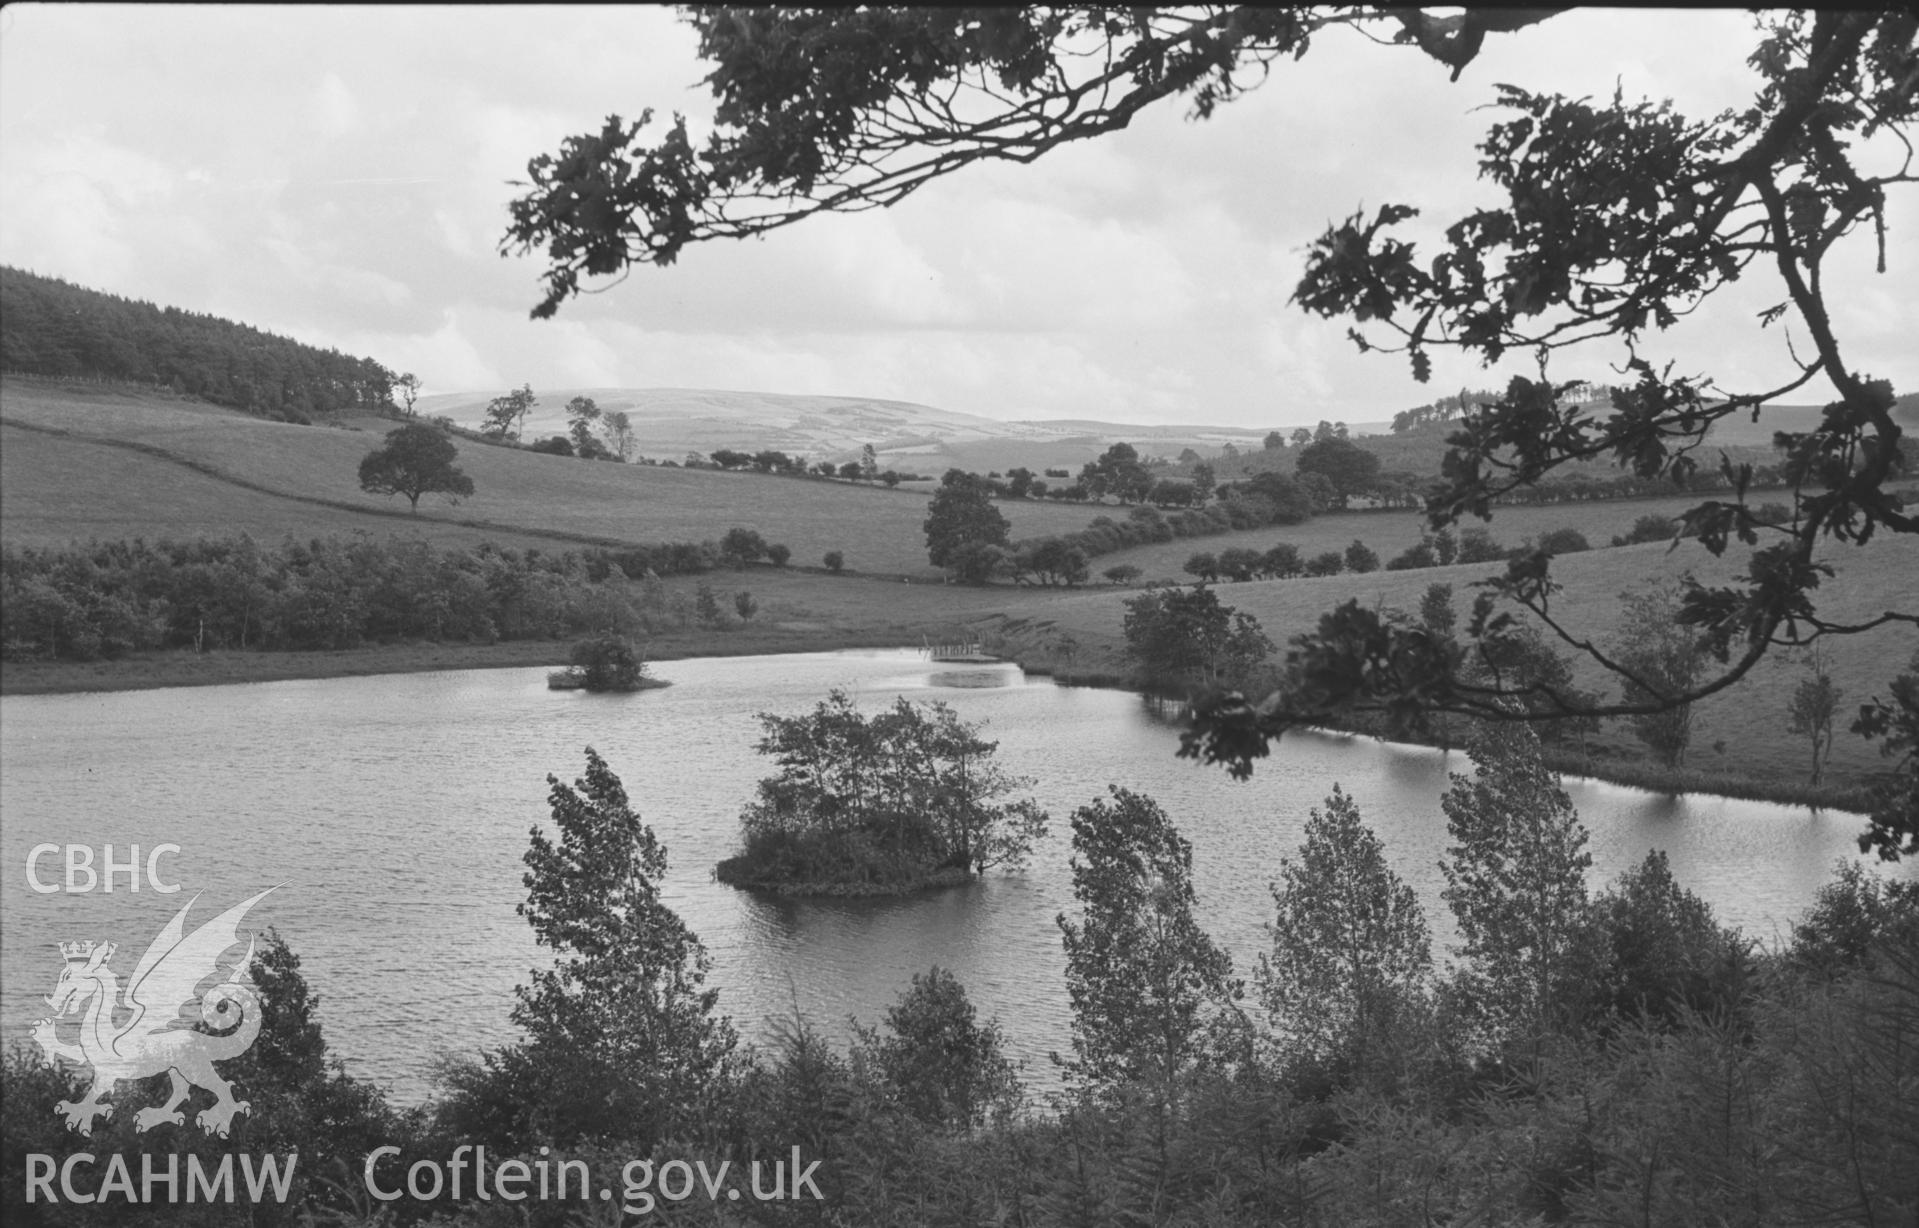 Digital copy of a black and white negative showing view over Falcondale pond from Deri-goch wood. Photographed by Arthur O. Chater on 16th August 1967, looking south from Grid Reference SN 569 502.